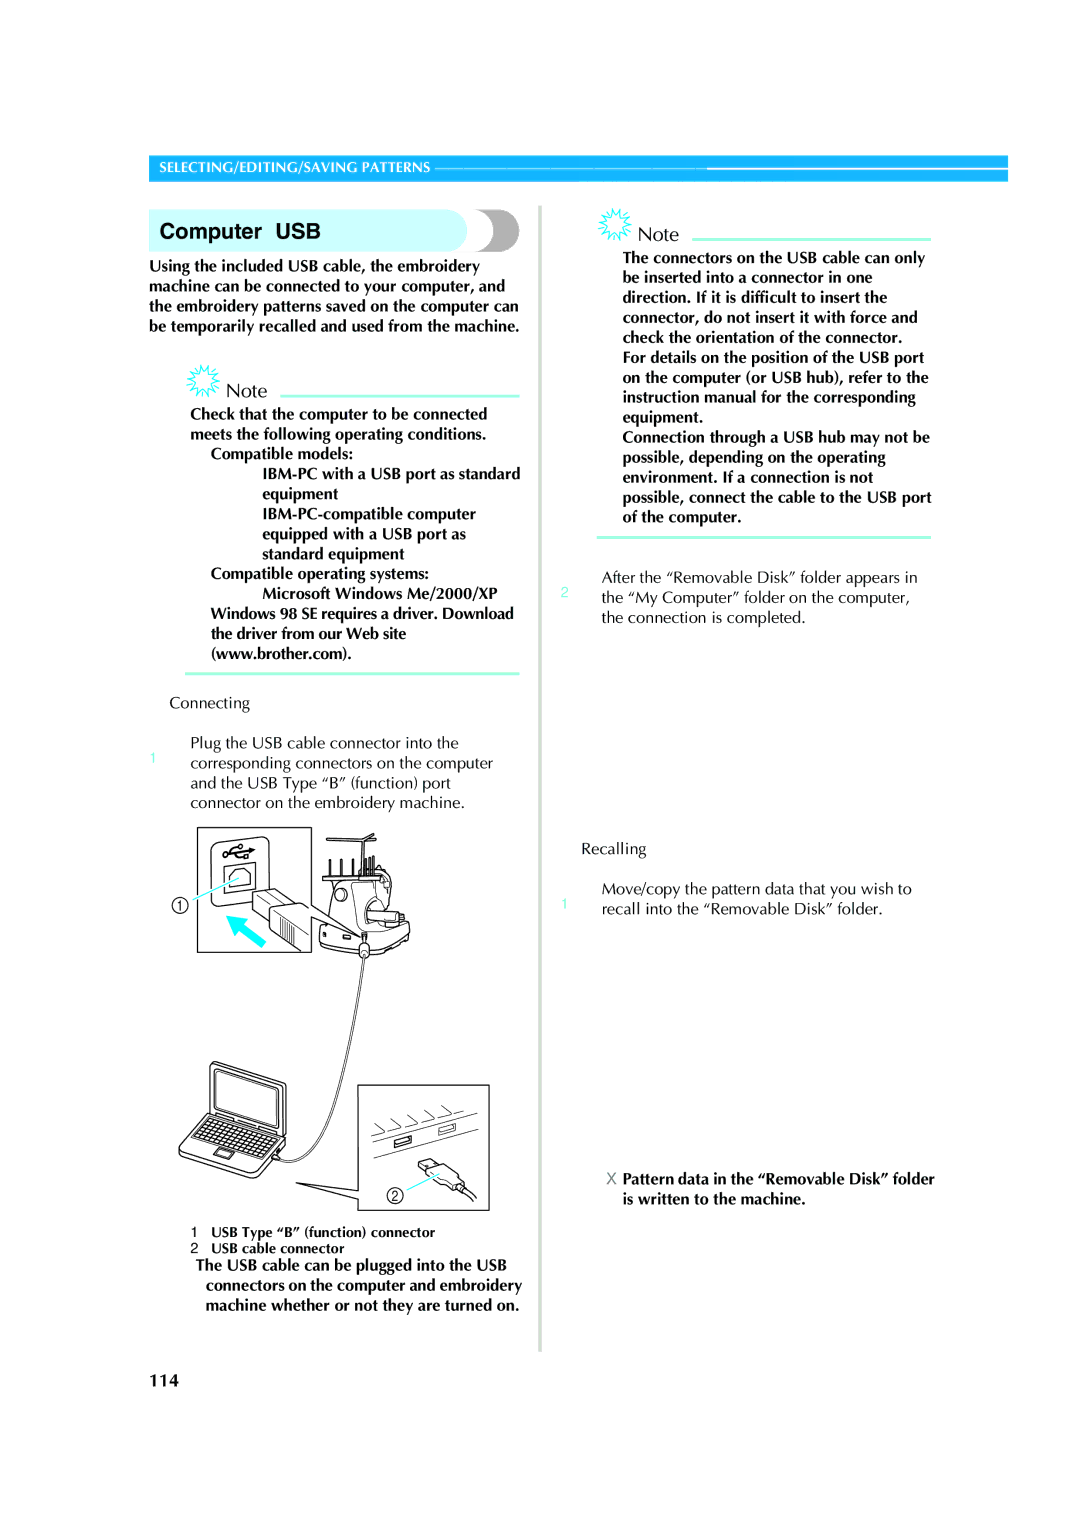 Brother PR-620 operation manual Computer USB, 114, Connecting 